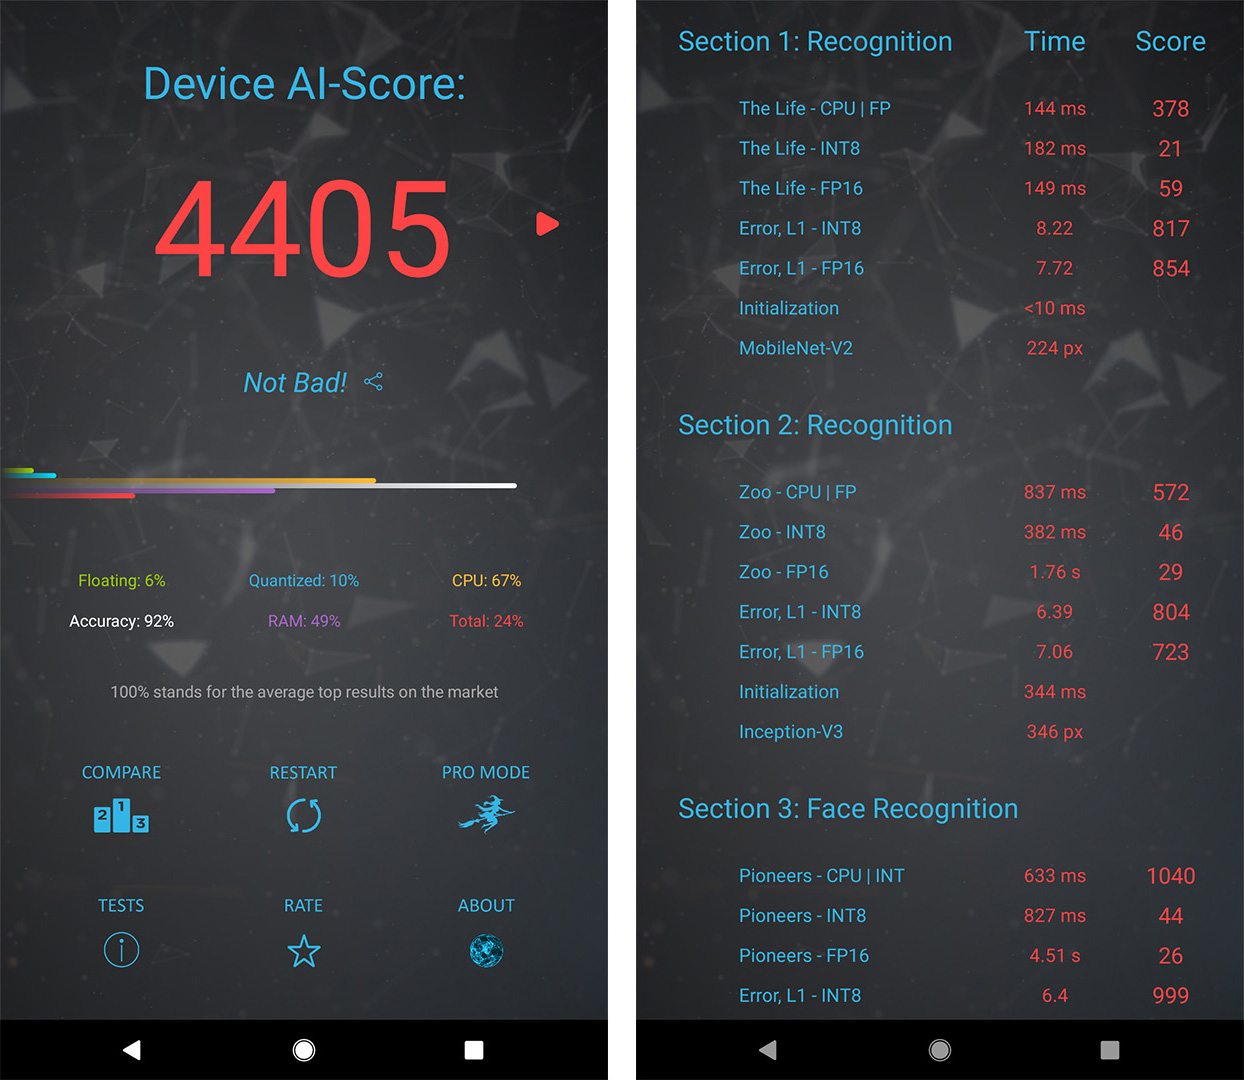 1910.06663] AI Benchmark: All About Deep Learning on Smartphones in 2019